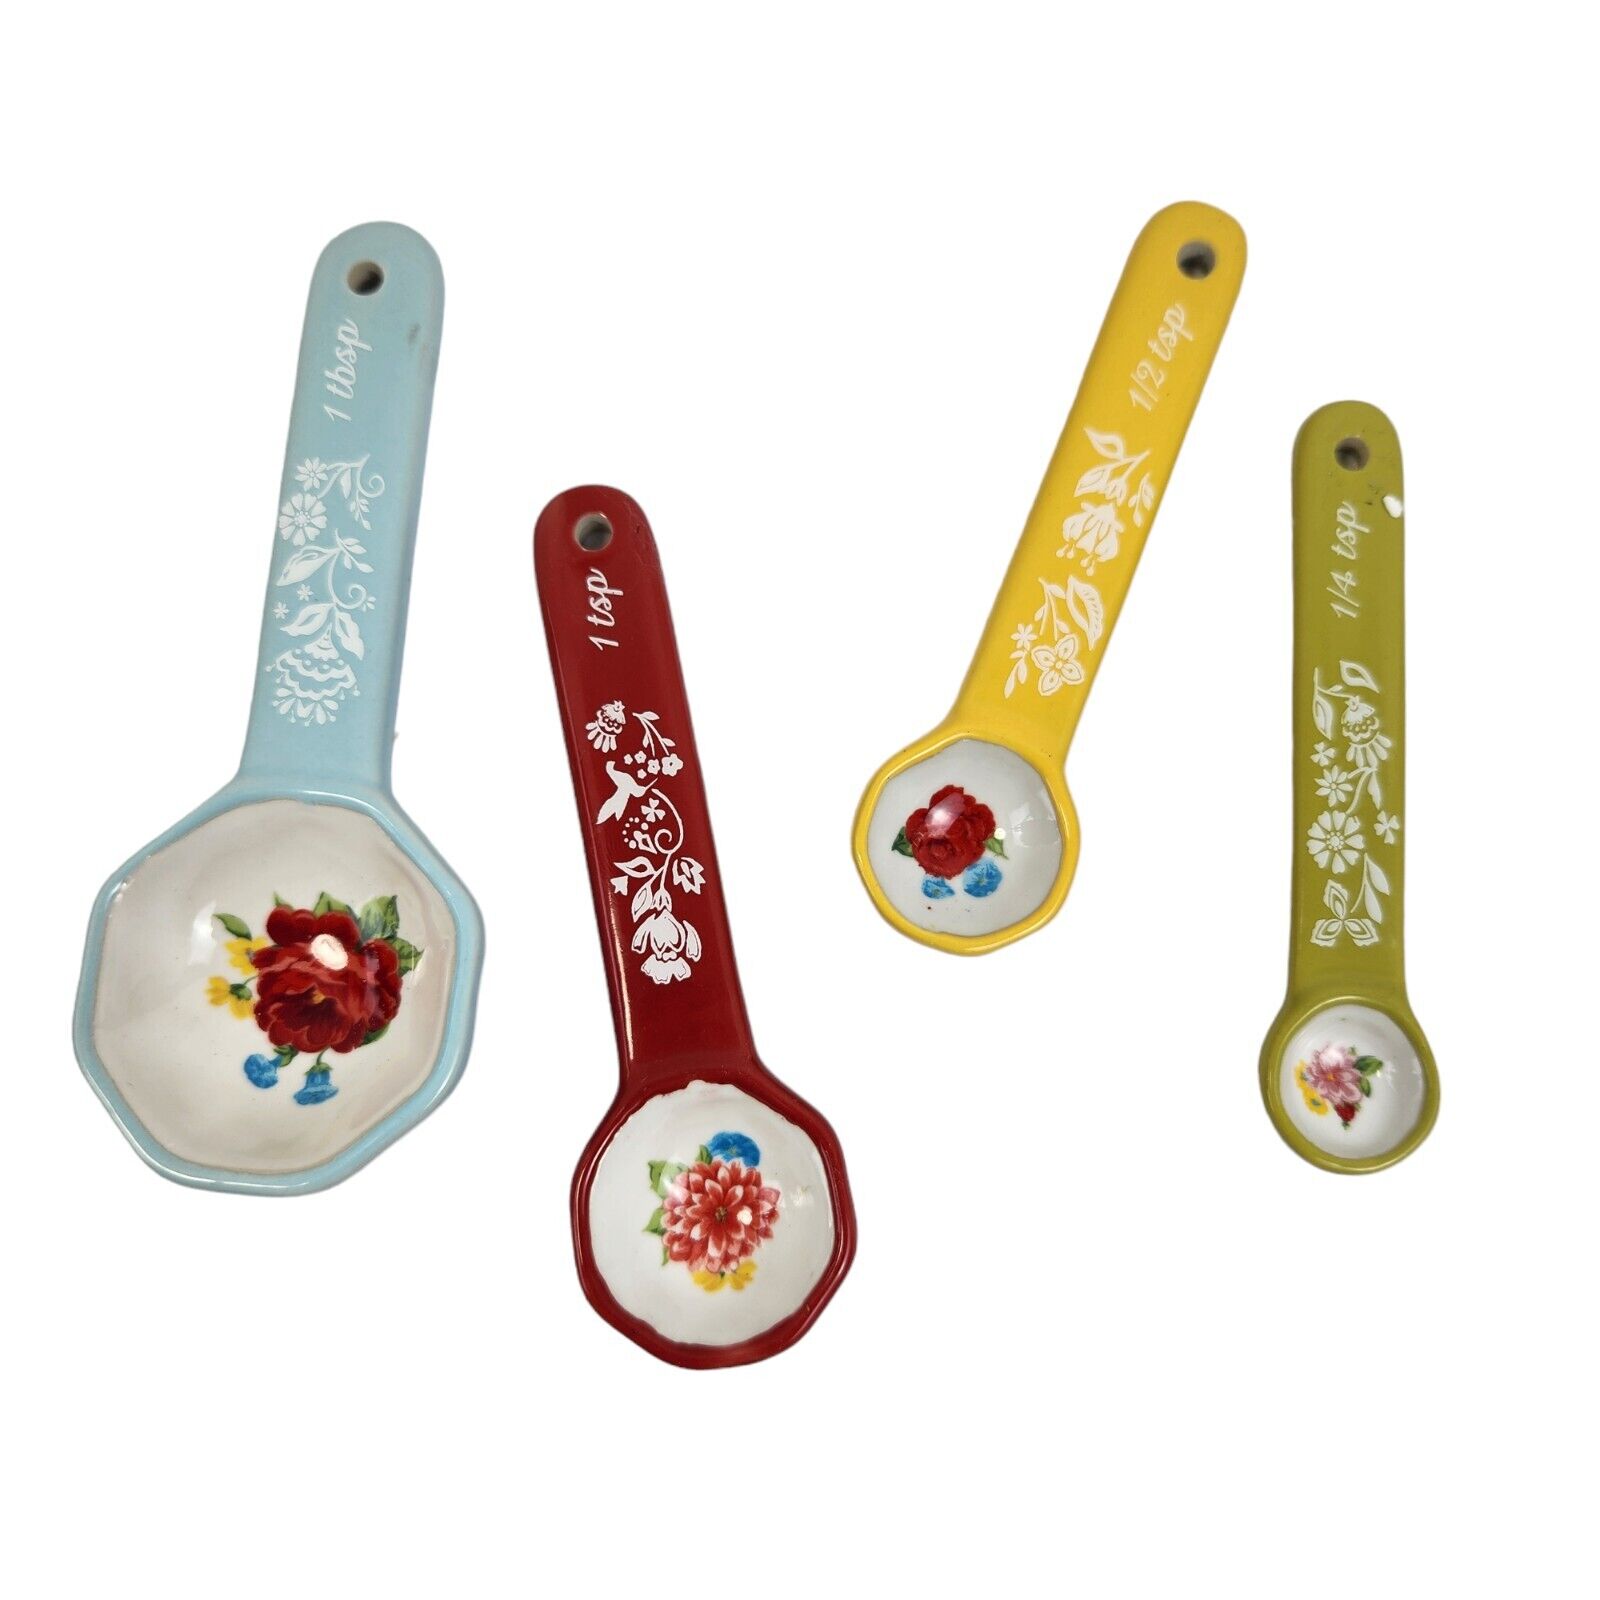 The Pioneer Woman Floral Stoneware Ceramic Measuring Spoons Set of 4